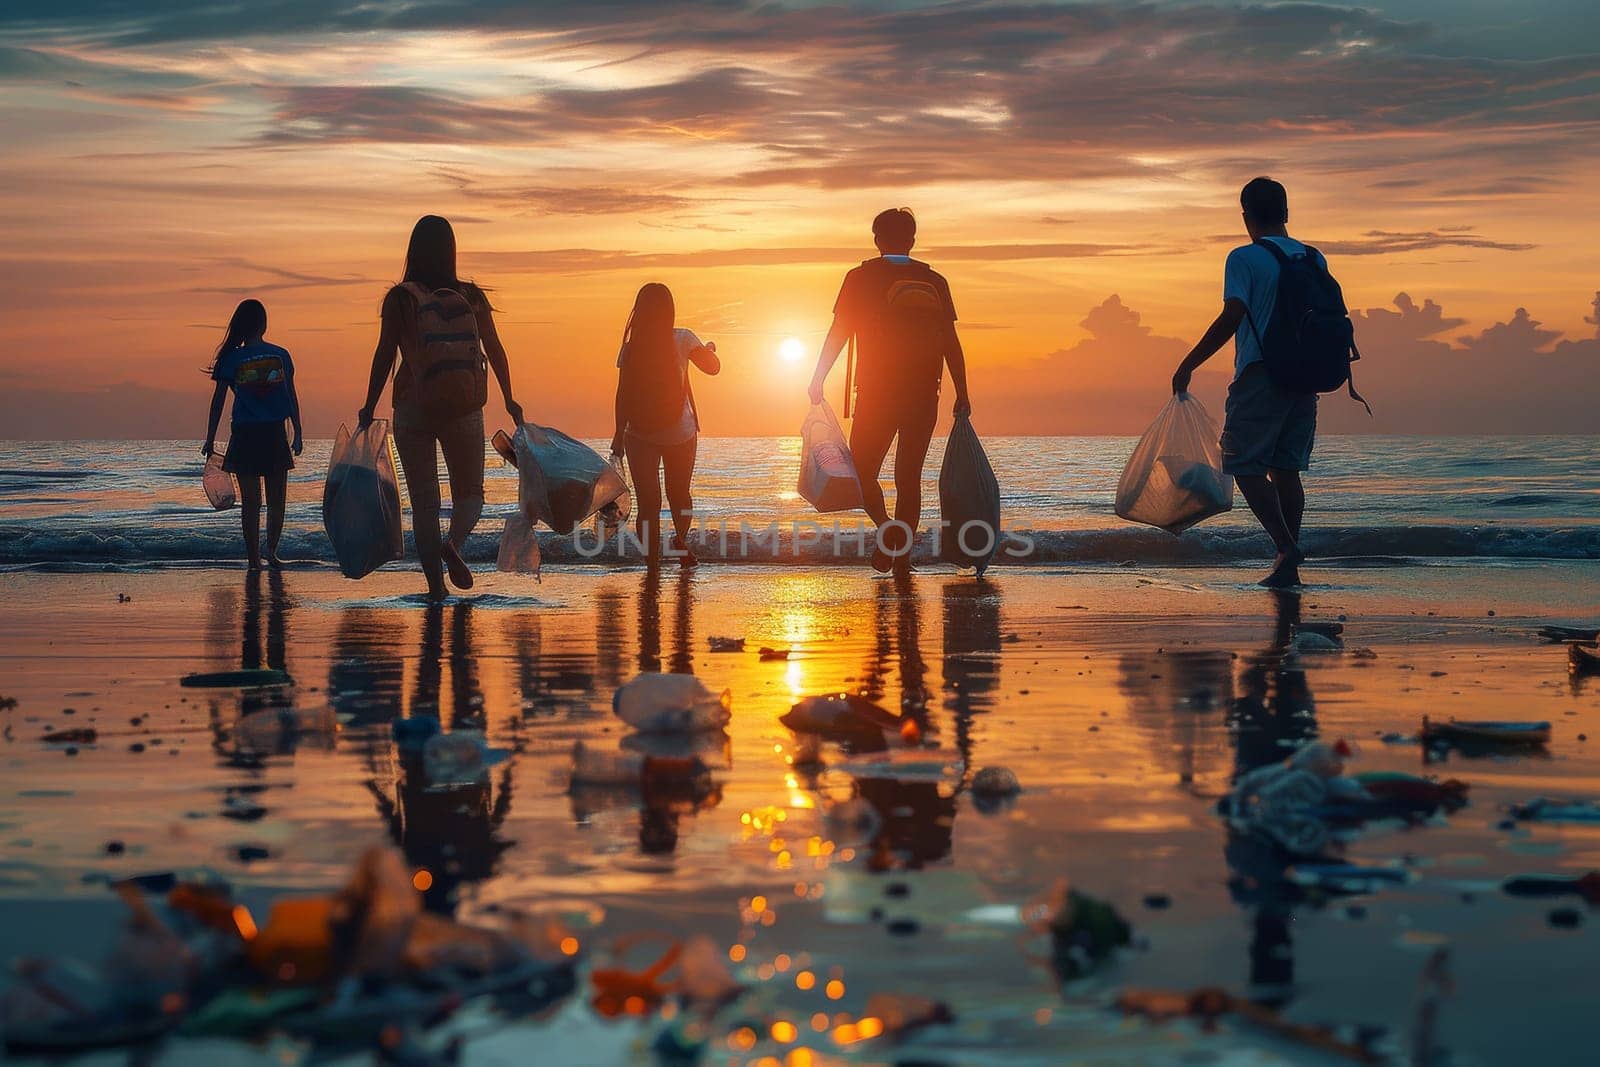 A group of people are walking on the beach, picking up trash. The sun is setting, creating a beautiful and serene atmosphere. The scene conveys the importance of taking care of the environment